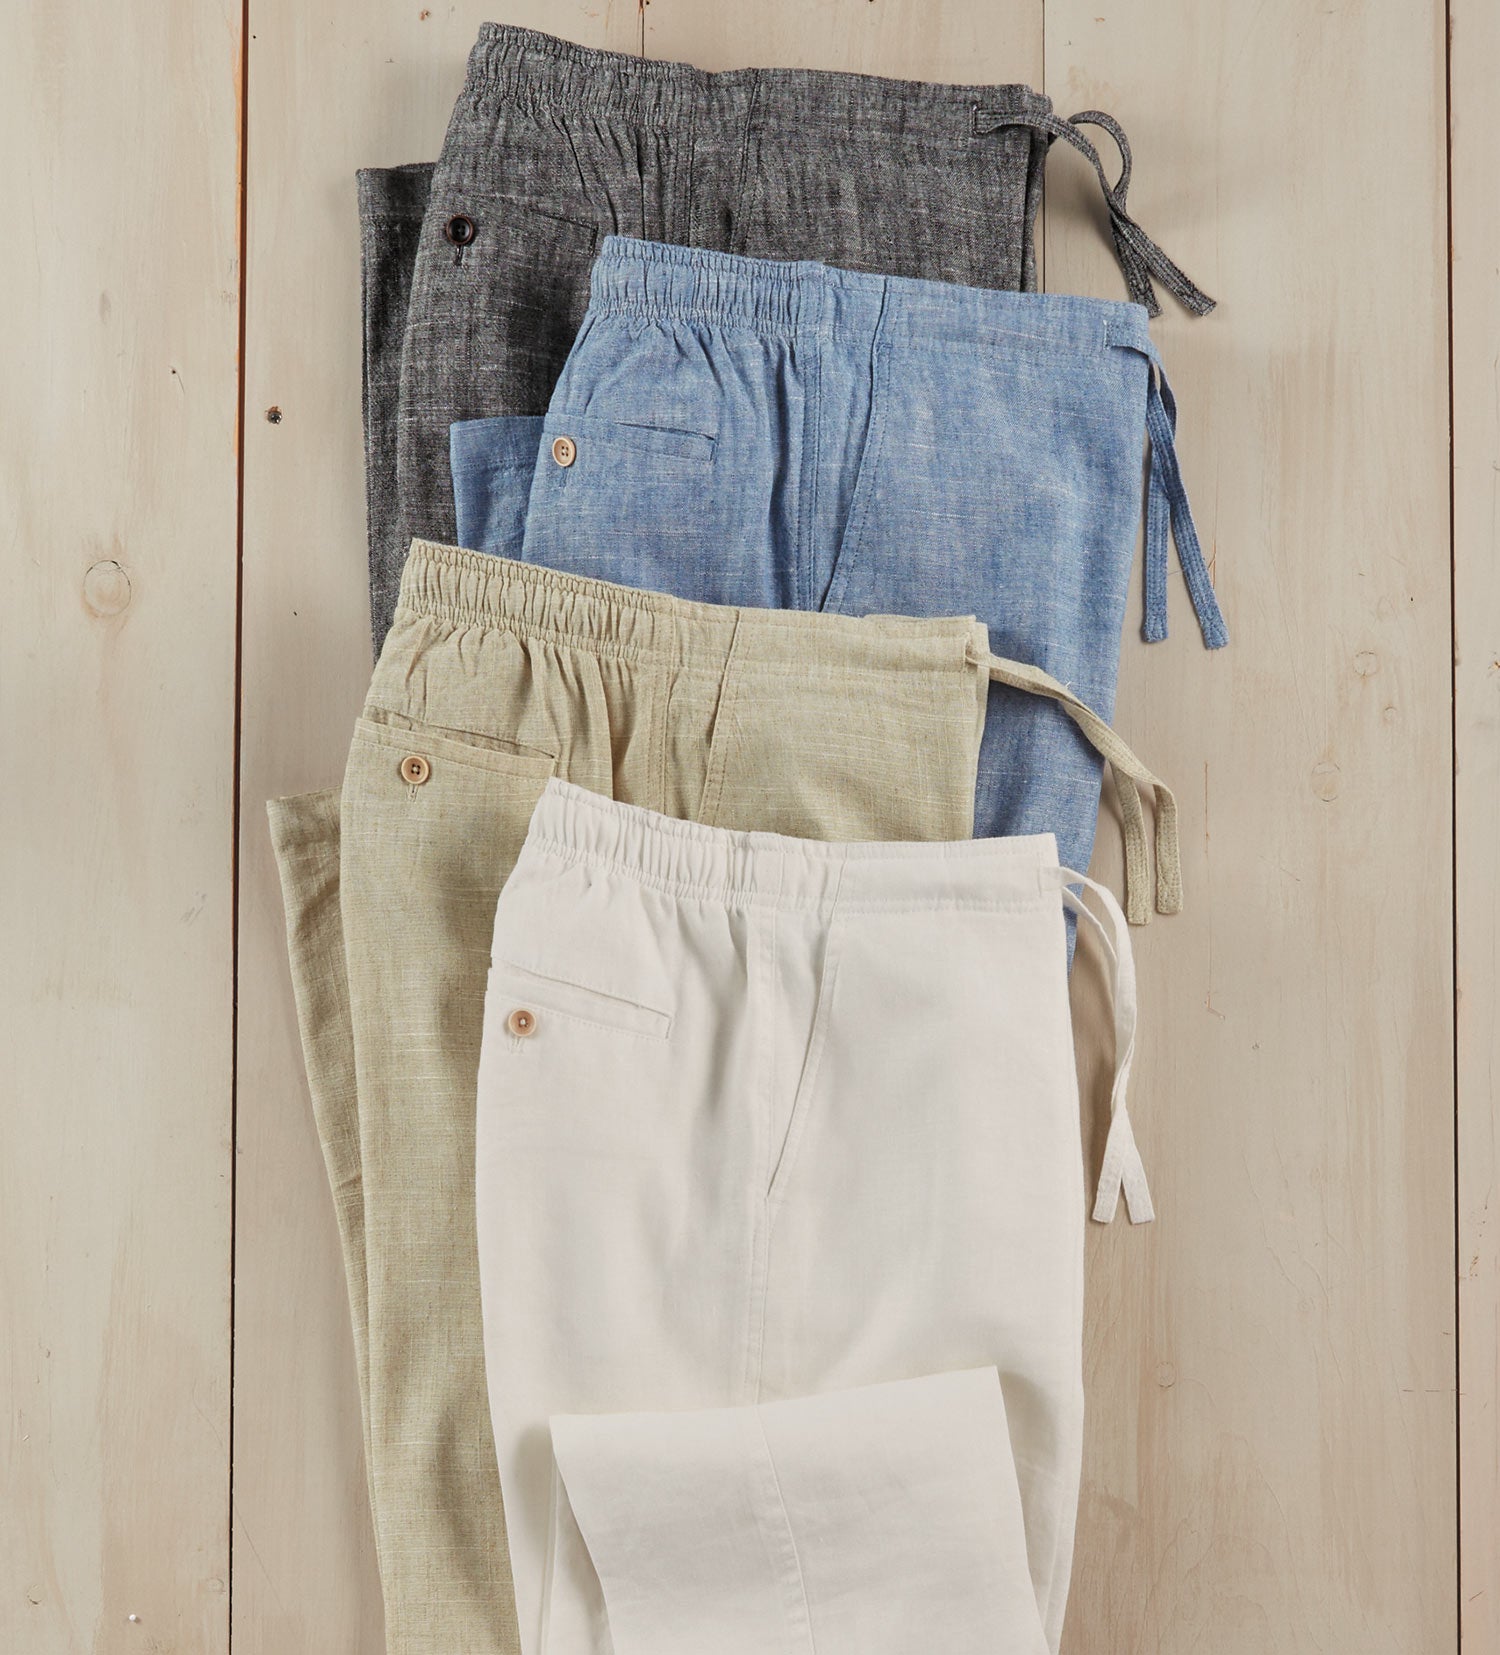 Pure Linen Drawstring Pants : Made To Measure Custom Jeans For Men & Women,  MakeYourOwnJeans®